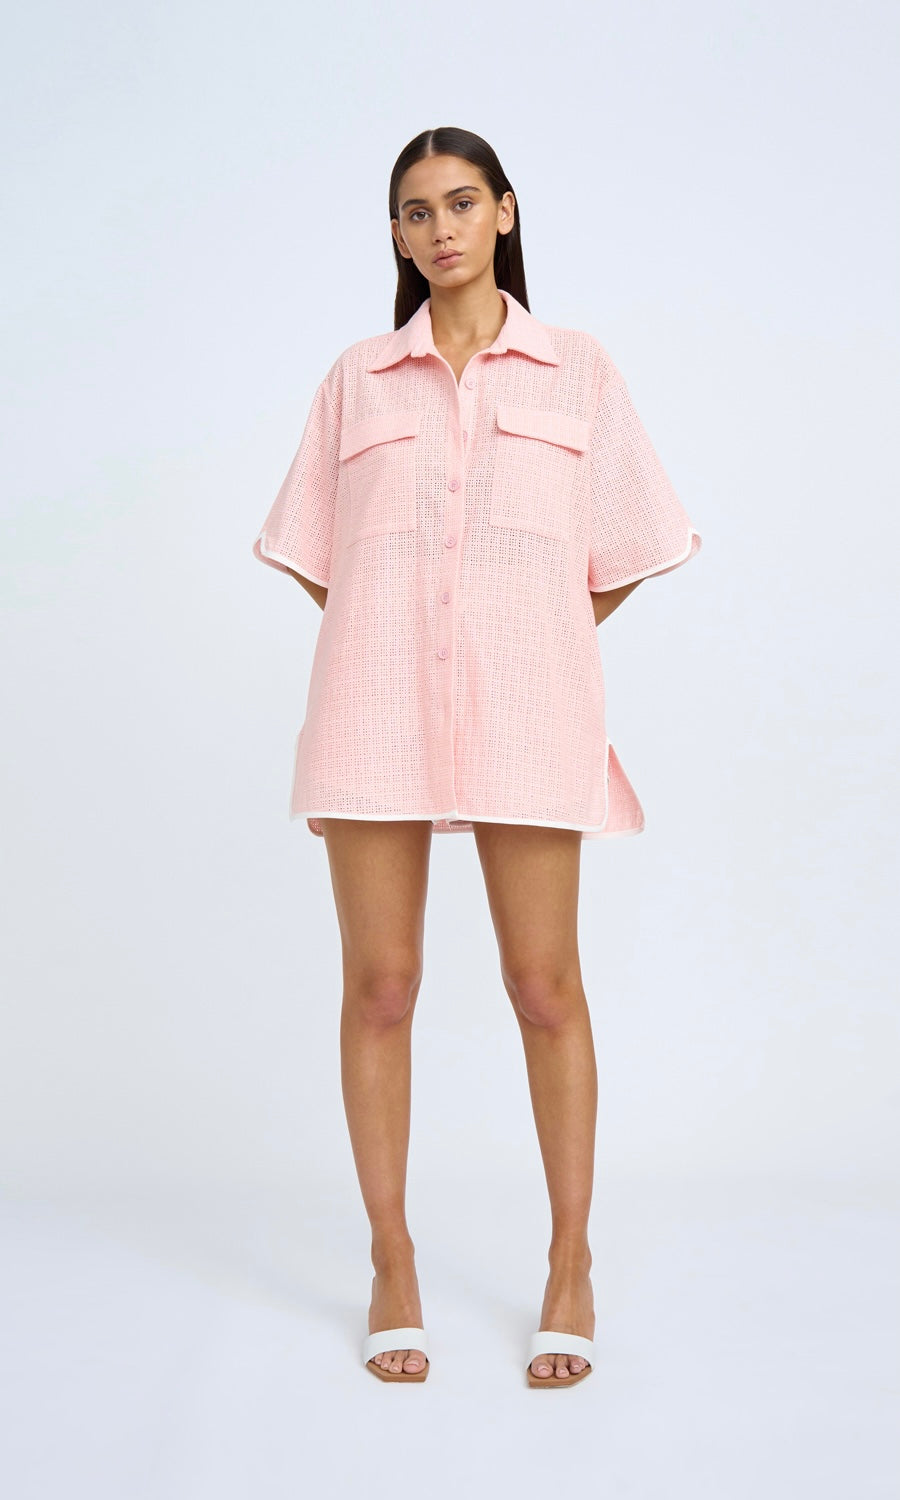 By Johnny Serena Pocket Sun Shirt In Dusty Pink